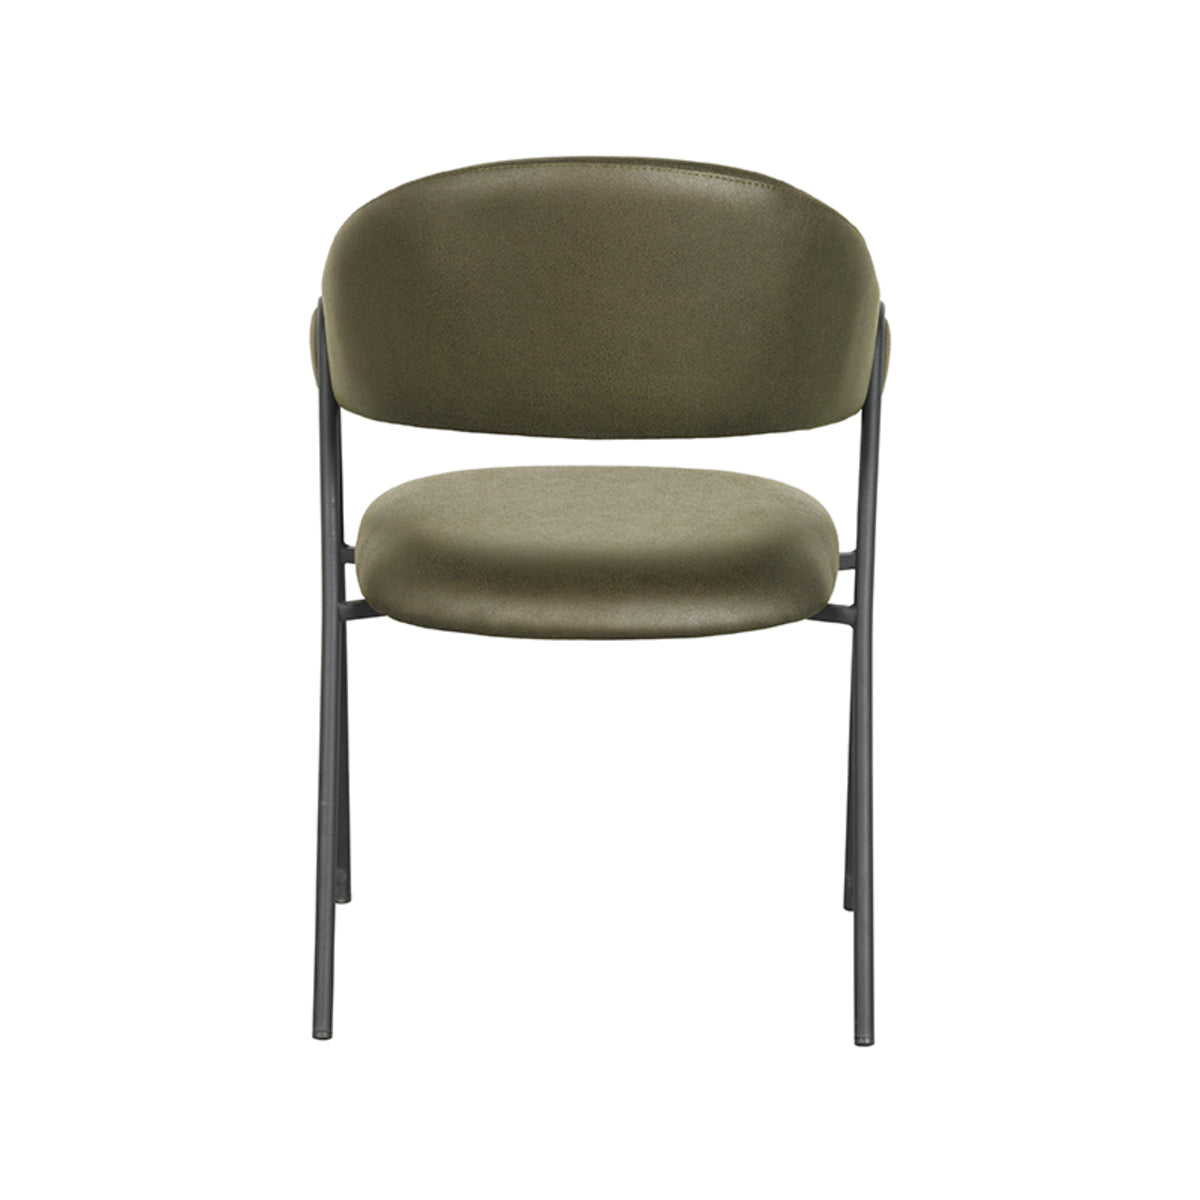 LABEL51 Dining room chair Lowen - Army green - Microfiber | 2 pieces